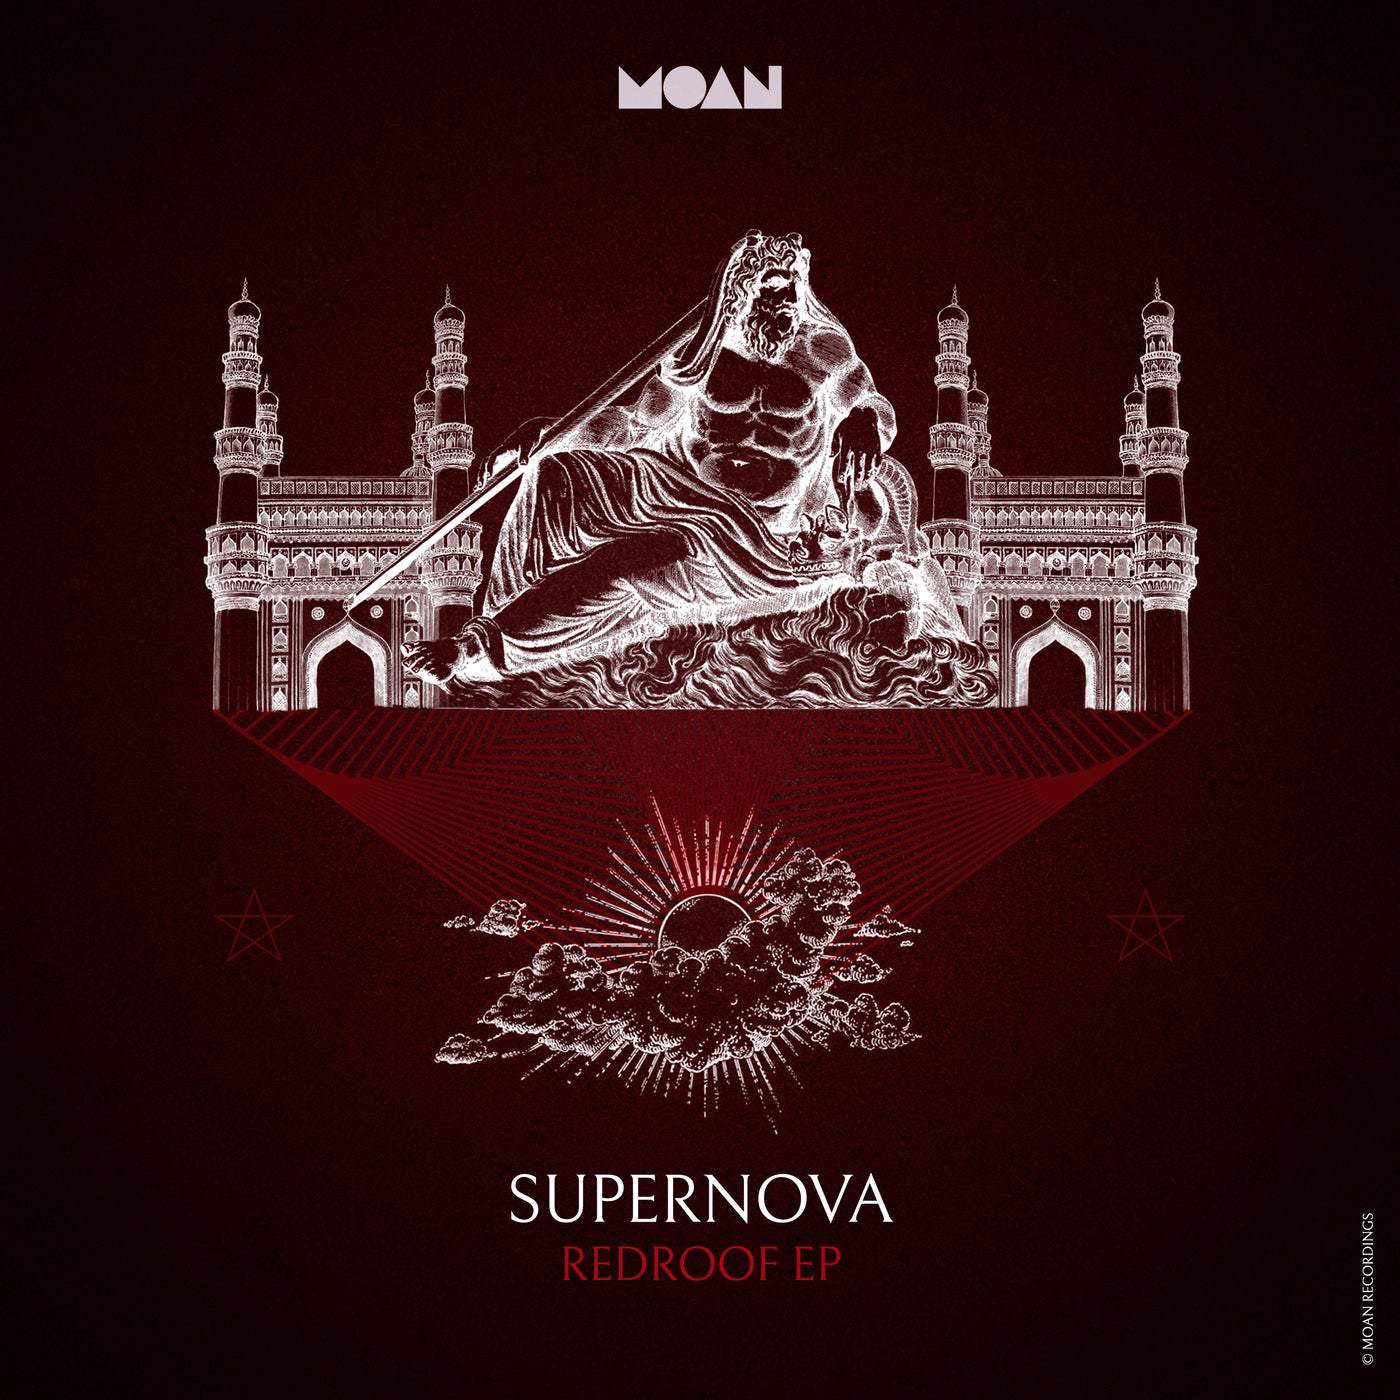 image cover: Redroof EP by Supernova on Moan